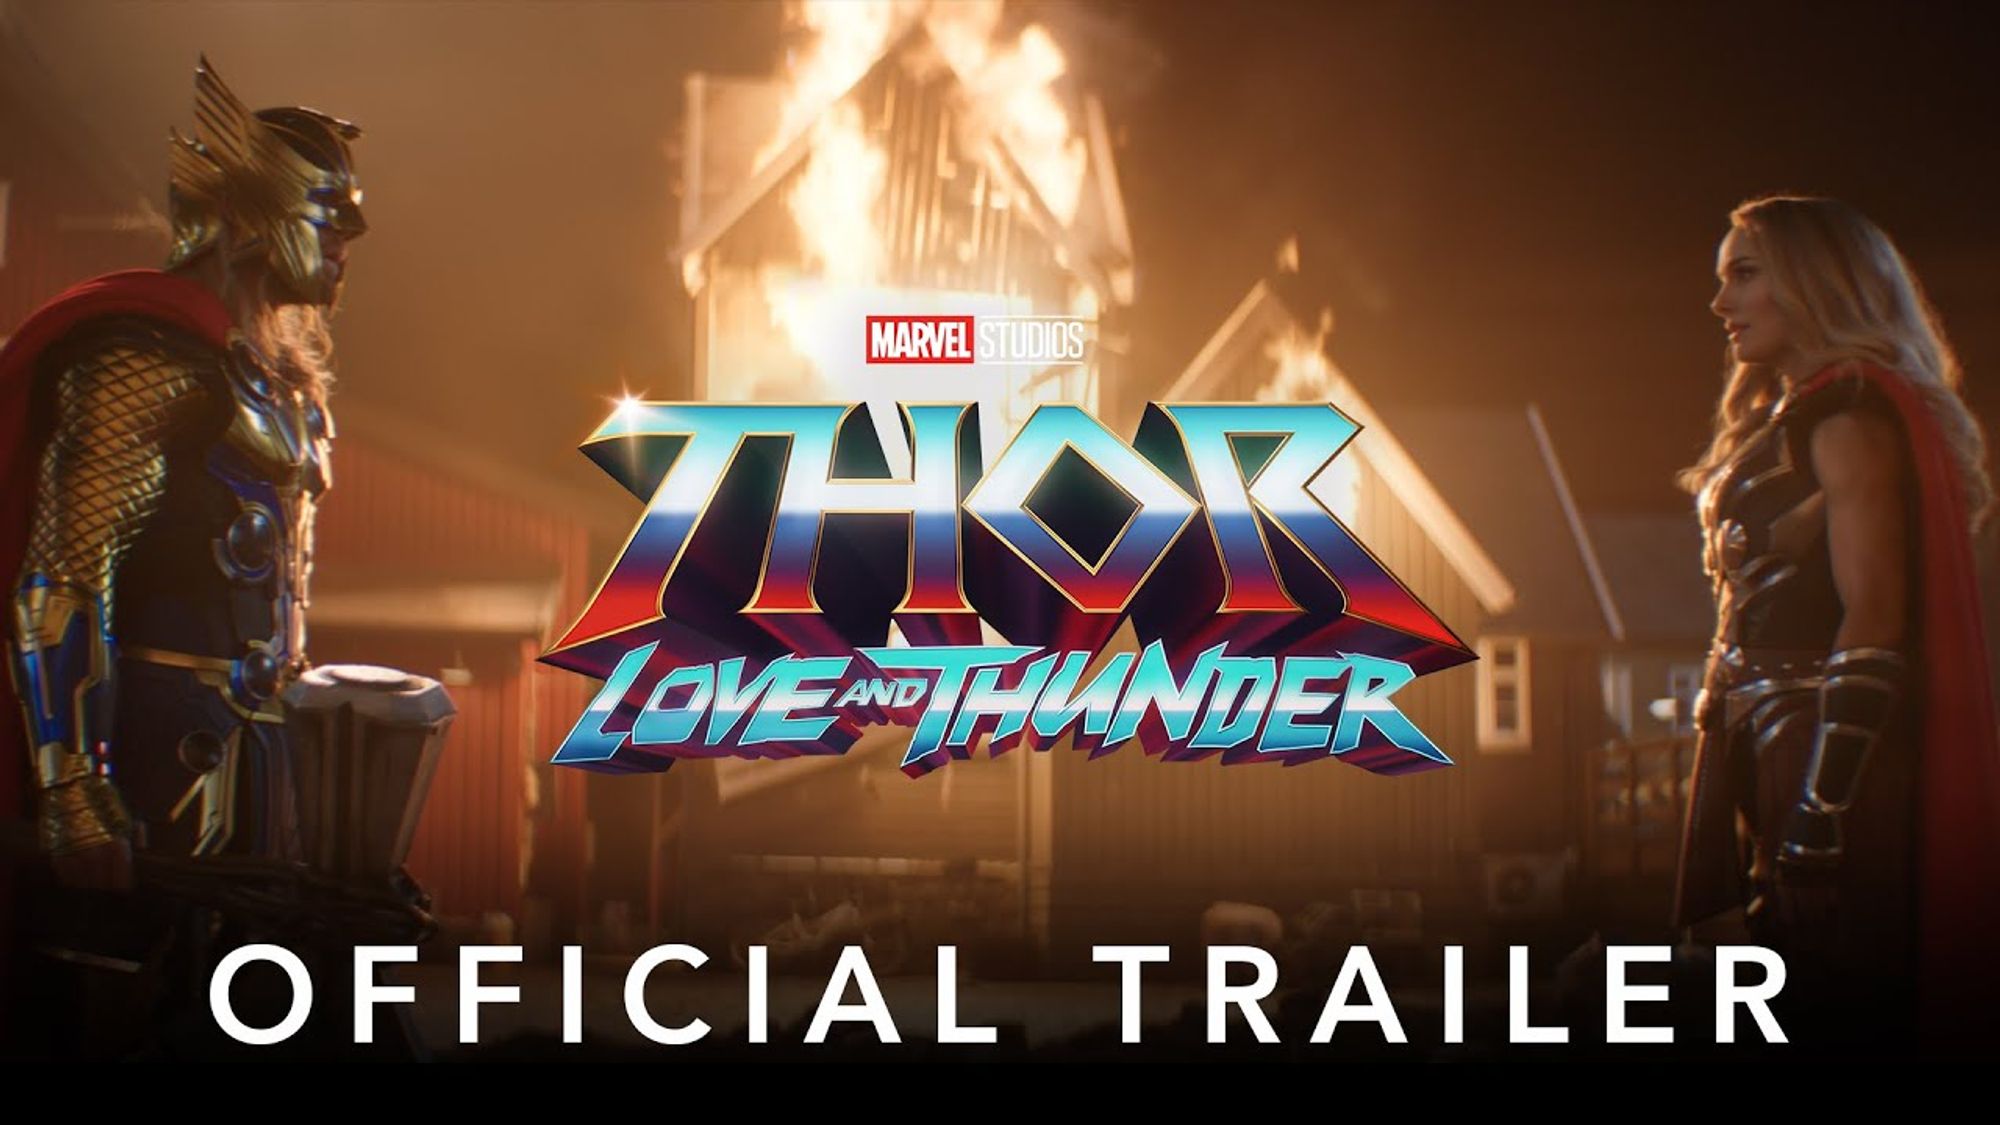 Film Thor: Love and Thunder hammers competition at North American box office  - Culture - Images